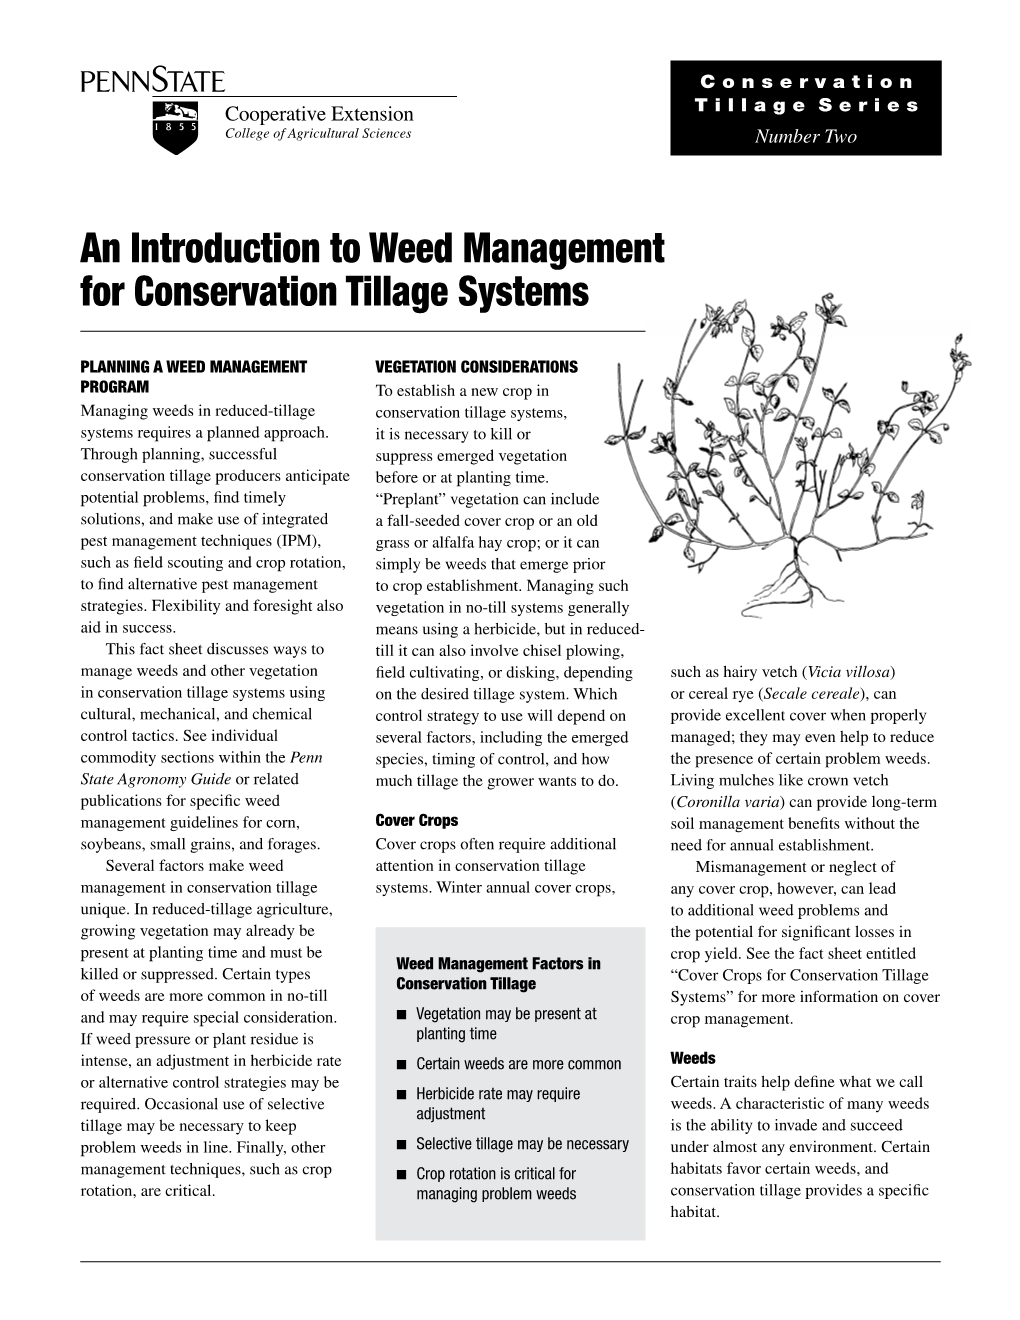 An Introduction to Weed Management for Conservation Tillage Systems